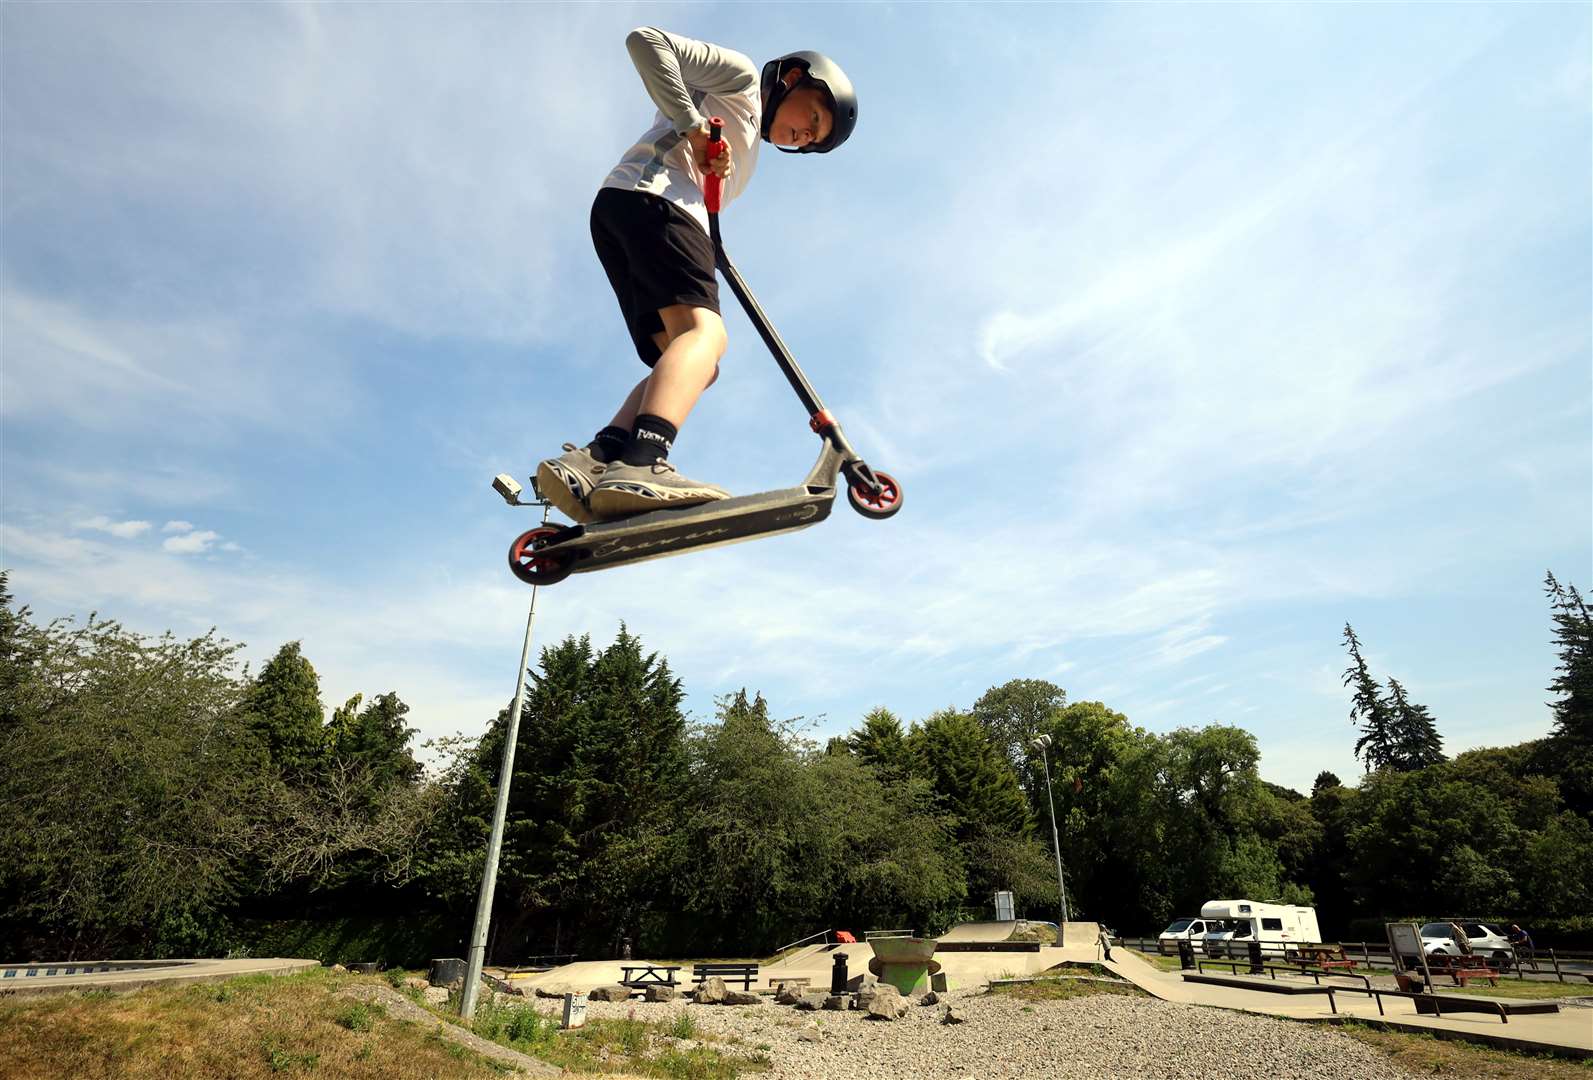 John Stephen getting air at the skate park in Inverness. Picture: James Mackenzie